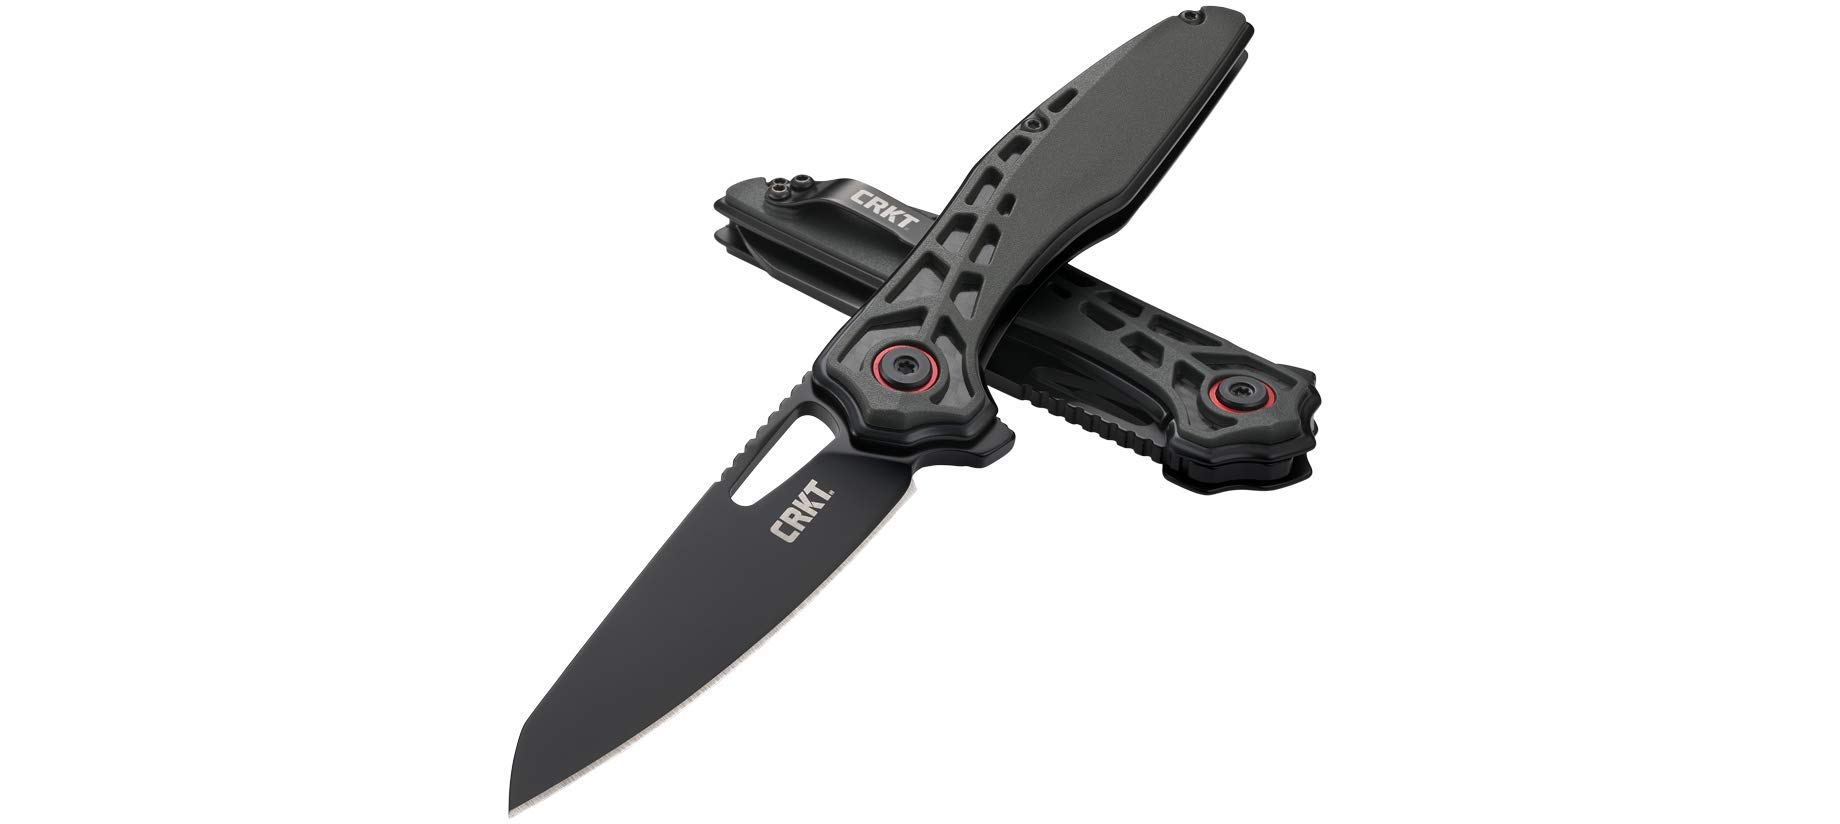 COLUMBIA RIVER KNIFE & TOOL Thero EDC Folding Pocket Knife: Everyday Carry Folder, Plain Edge, Sheepsfoot Blade with Black Oxide Finish, Flipper, Glass Reinforced Nylon and Carbon Fiber Handle 6290